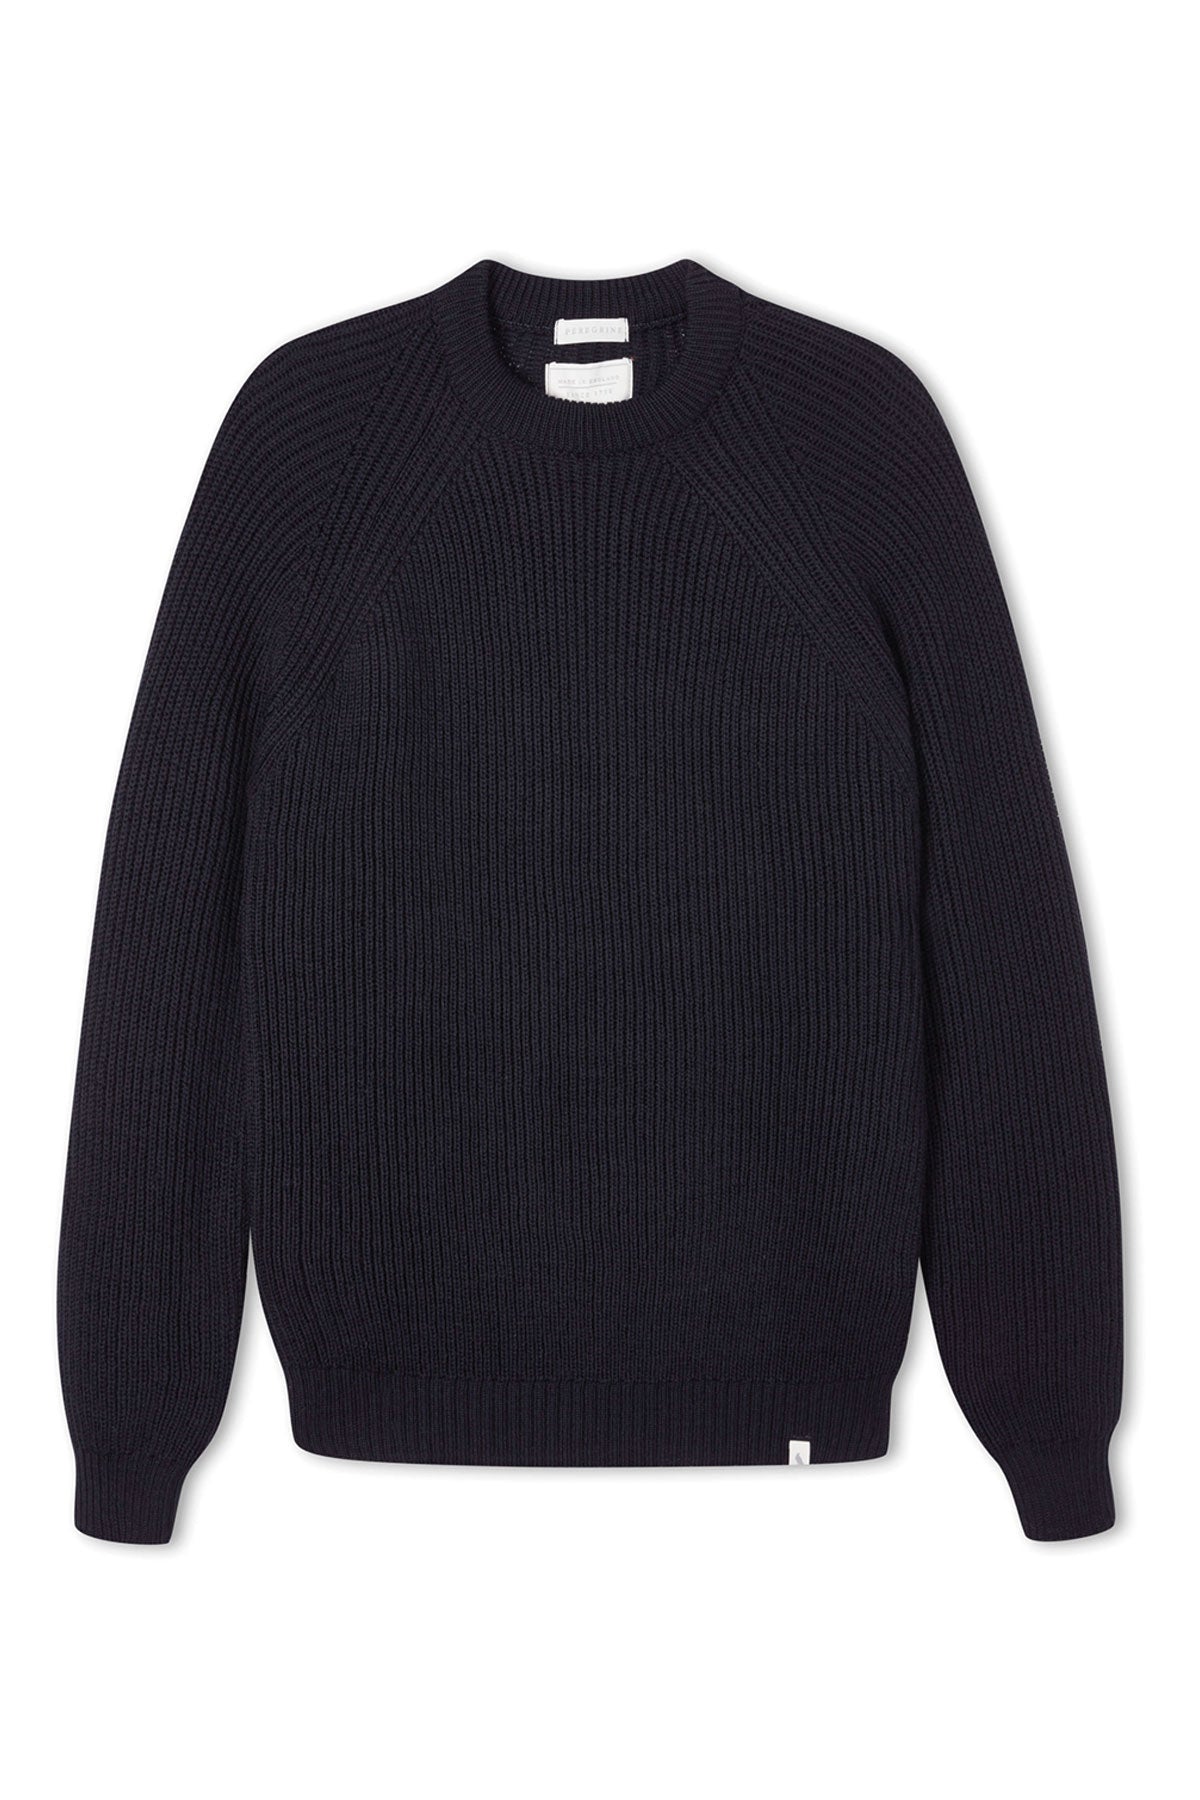 Peregrine Ford Crew Jumper In Navy The Rugged Society 1438